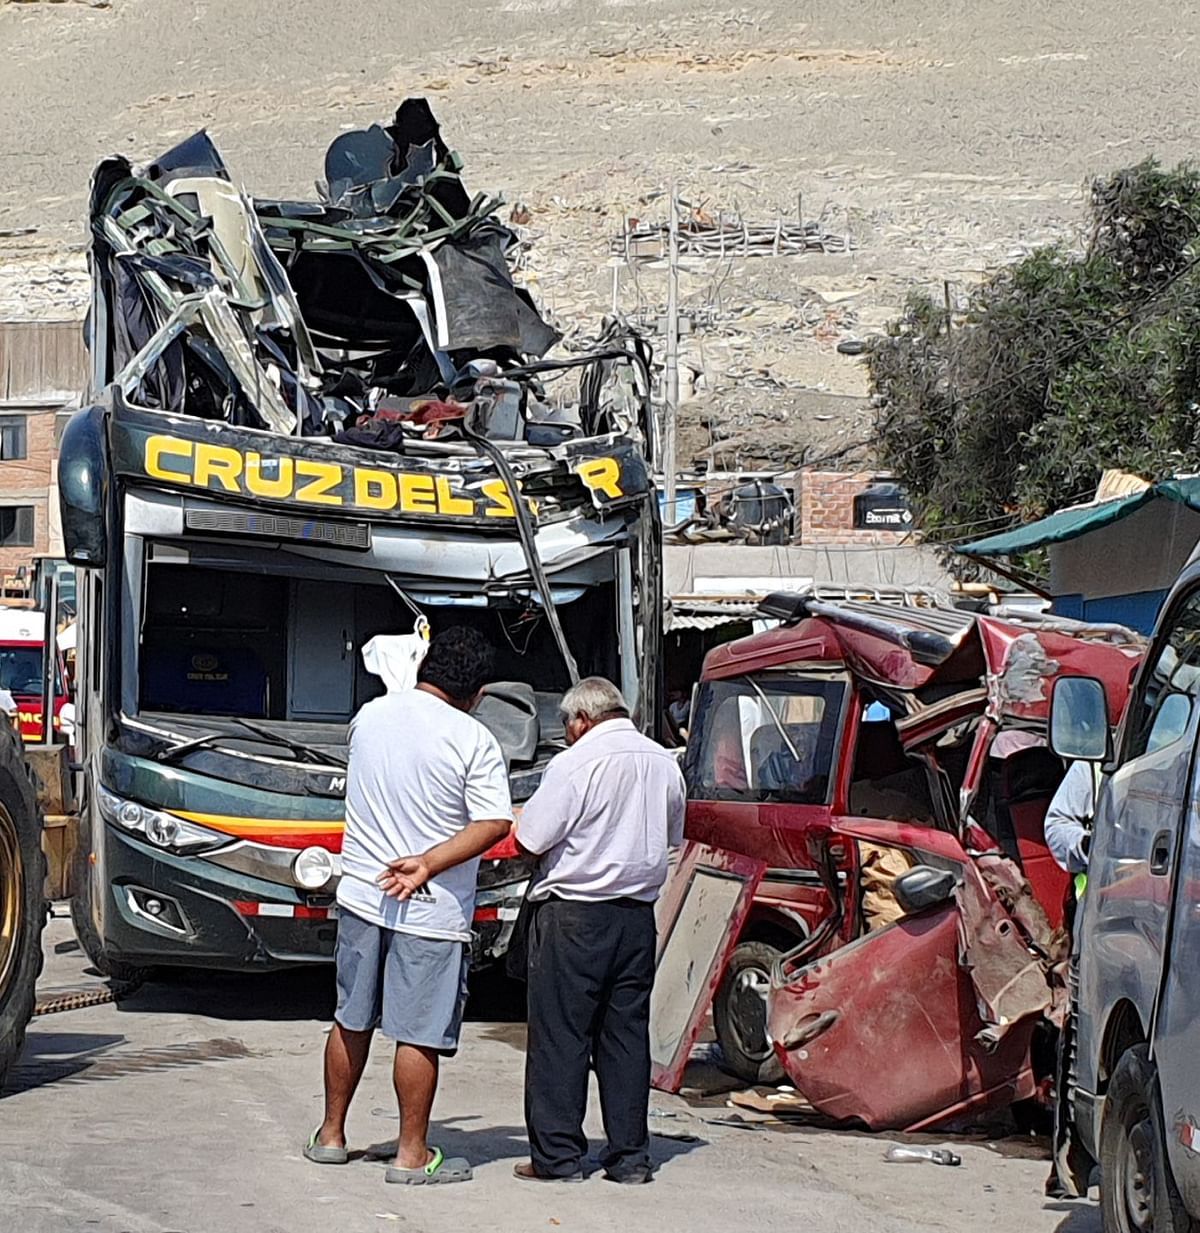 At least 14 people were killed and 40 others injured after a bus crashed into parked cars in the south of Peru, police said on Monday Cap: Men look at a a double-decker bus that crashed into parked cards on the Pan American Highway in the Arequipa region, southern Peru, on early 6 January 2020. Photo: AFP